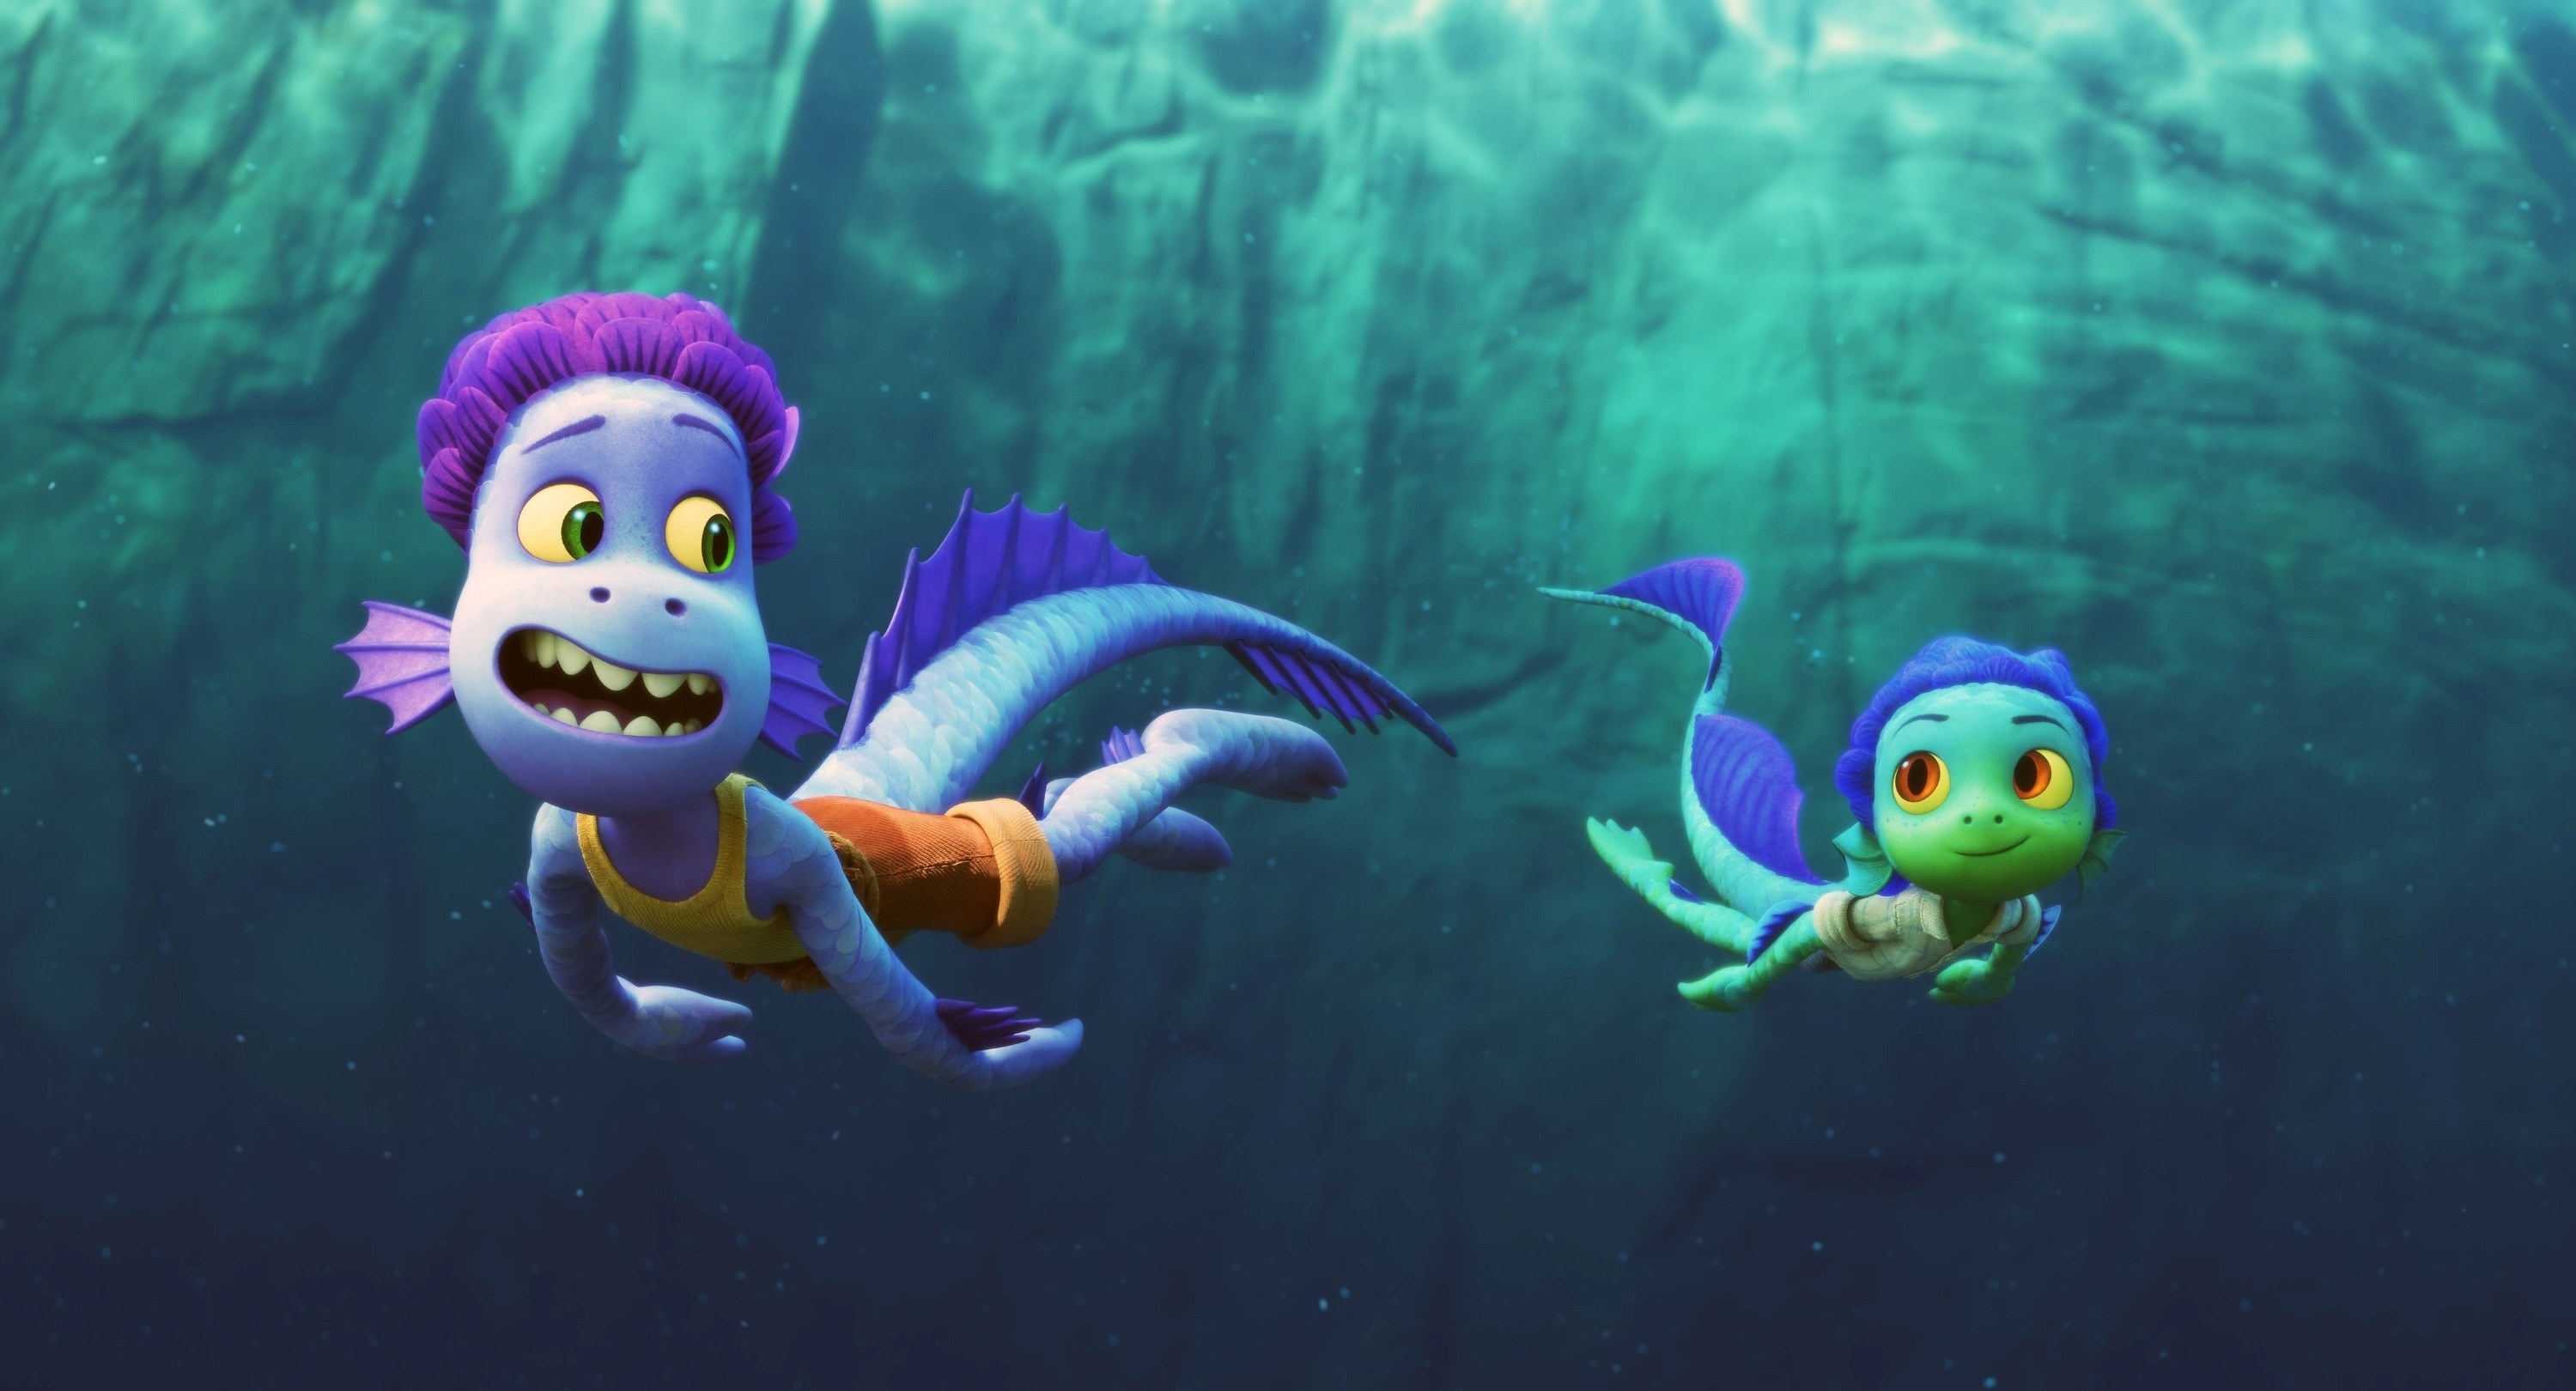 Alberto and Luca as sea monsters in water